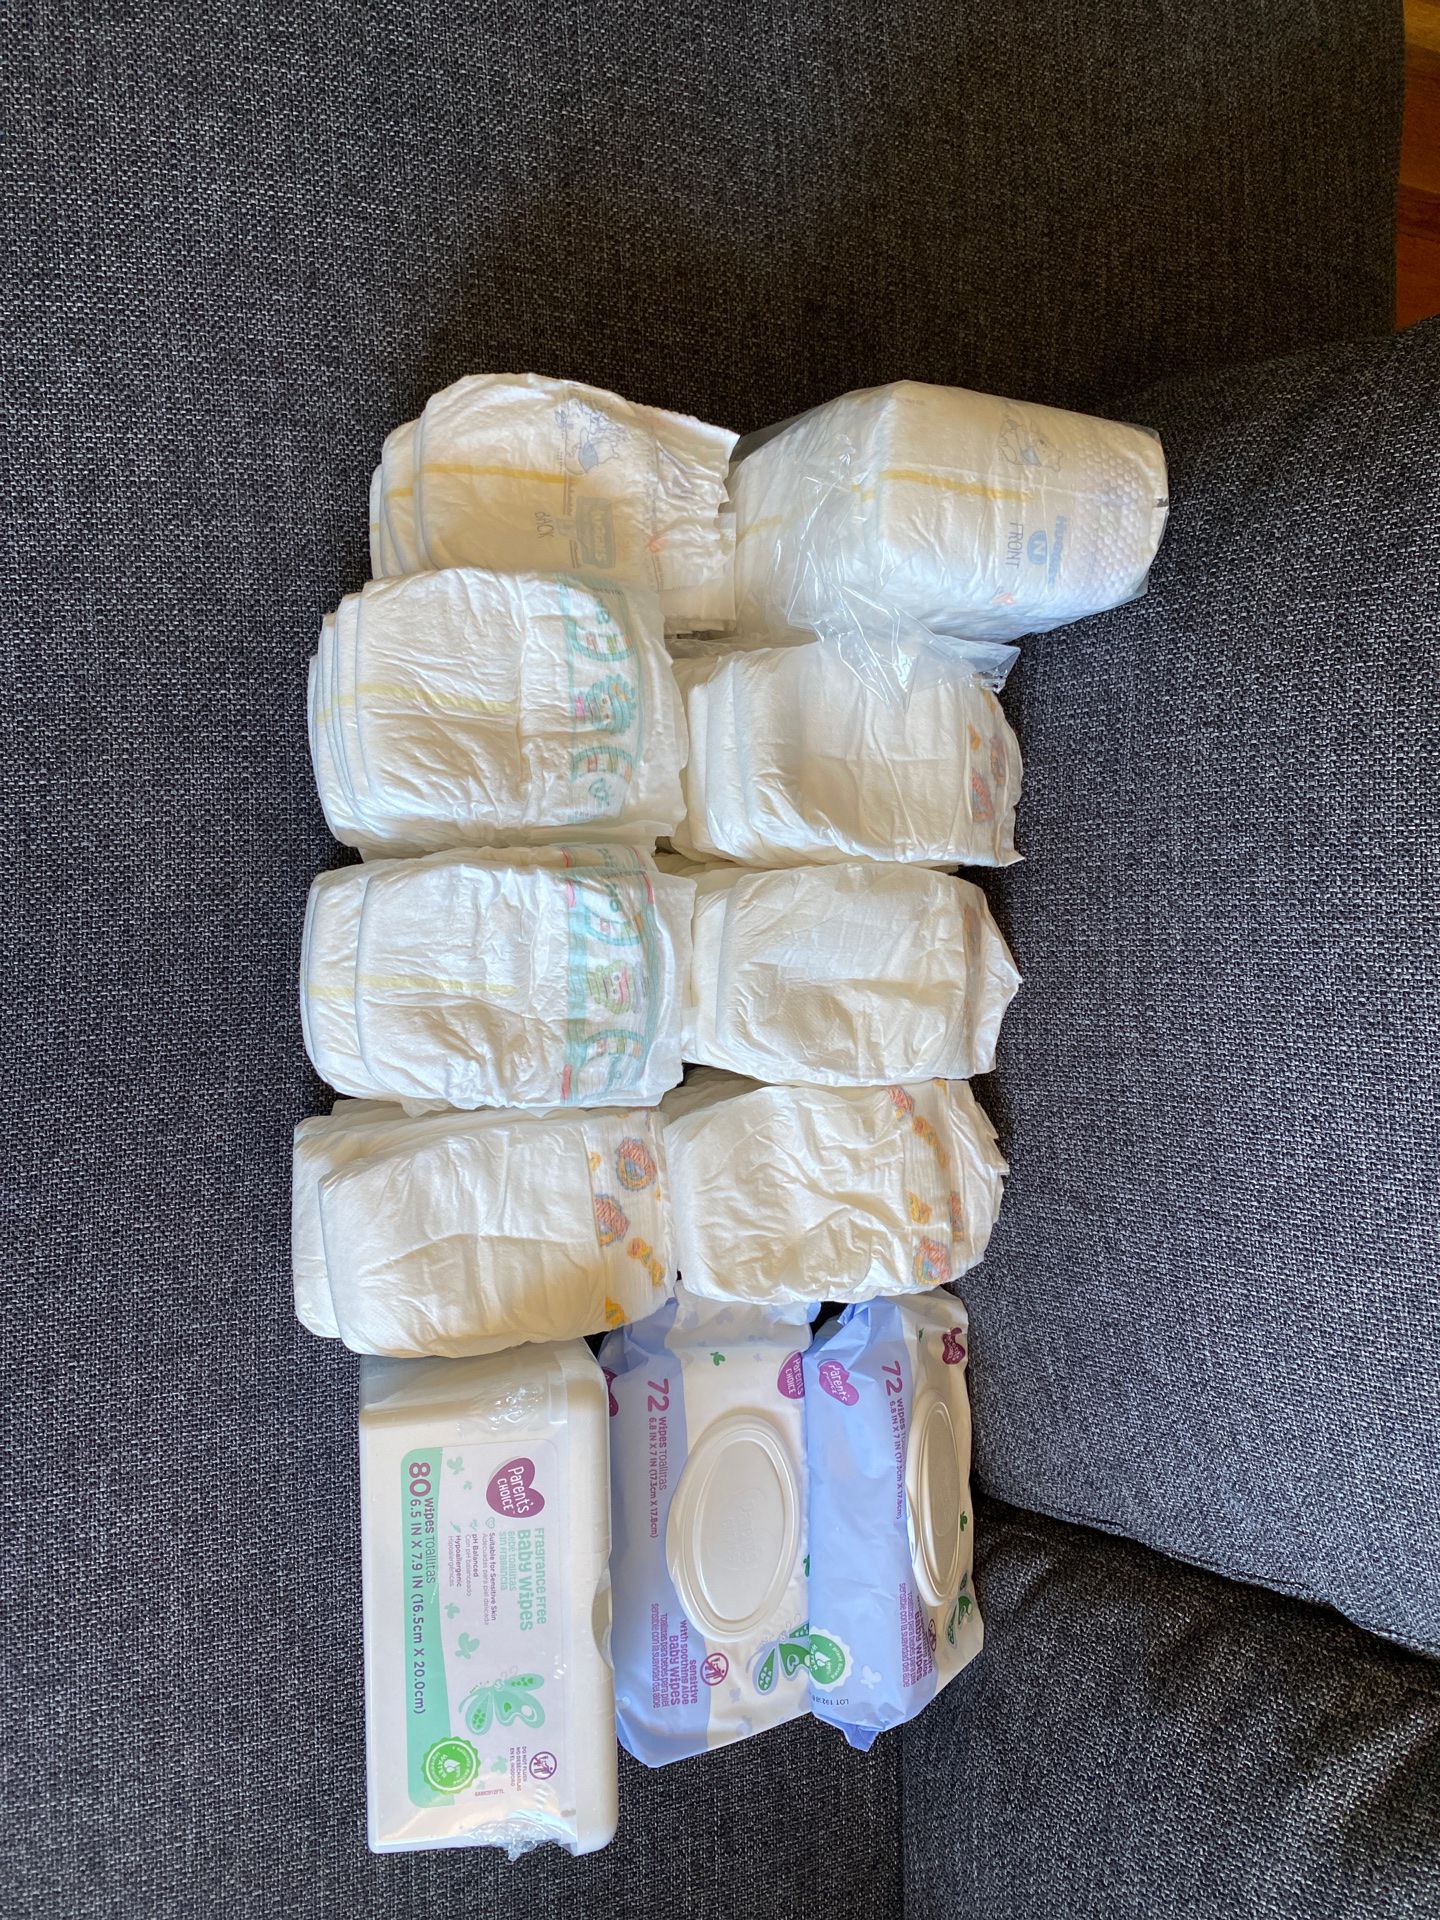 Newborn baby diapers and wipes